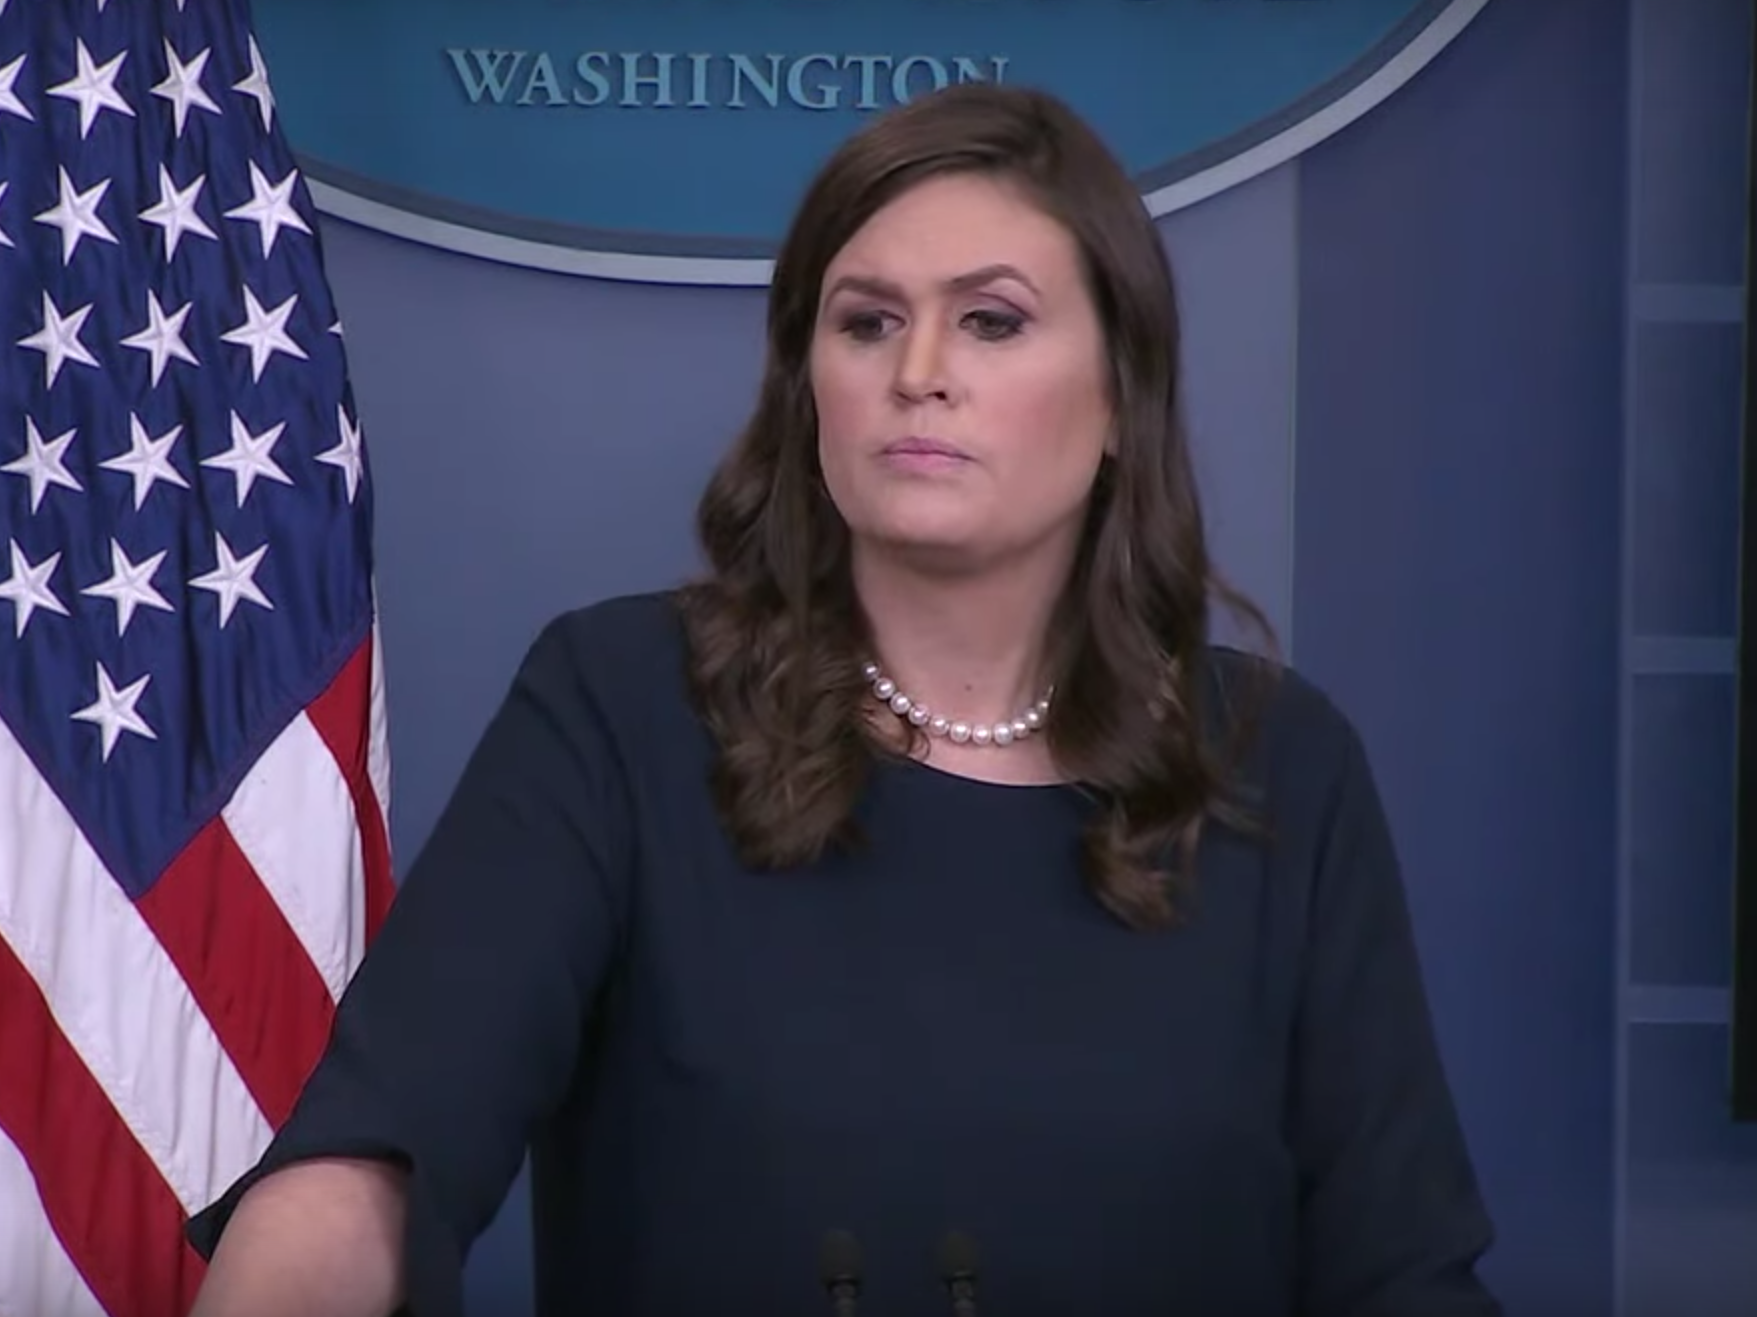 Ms Sanders choked up while describing heroic acts of victims in Las Vegas